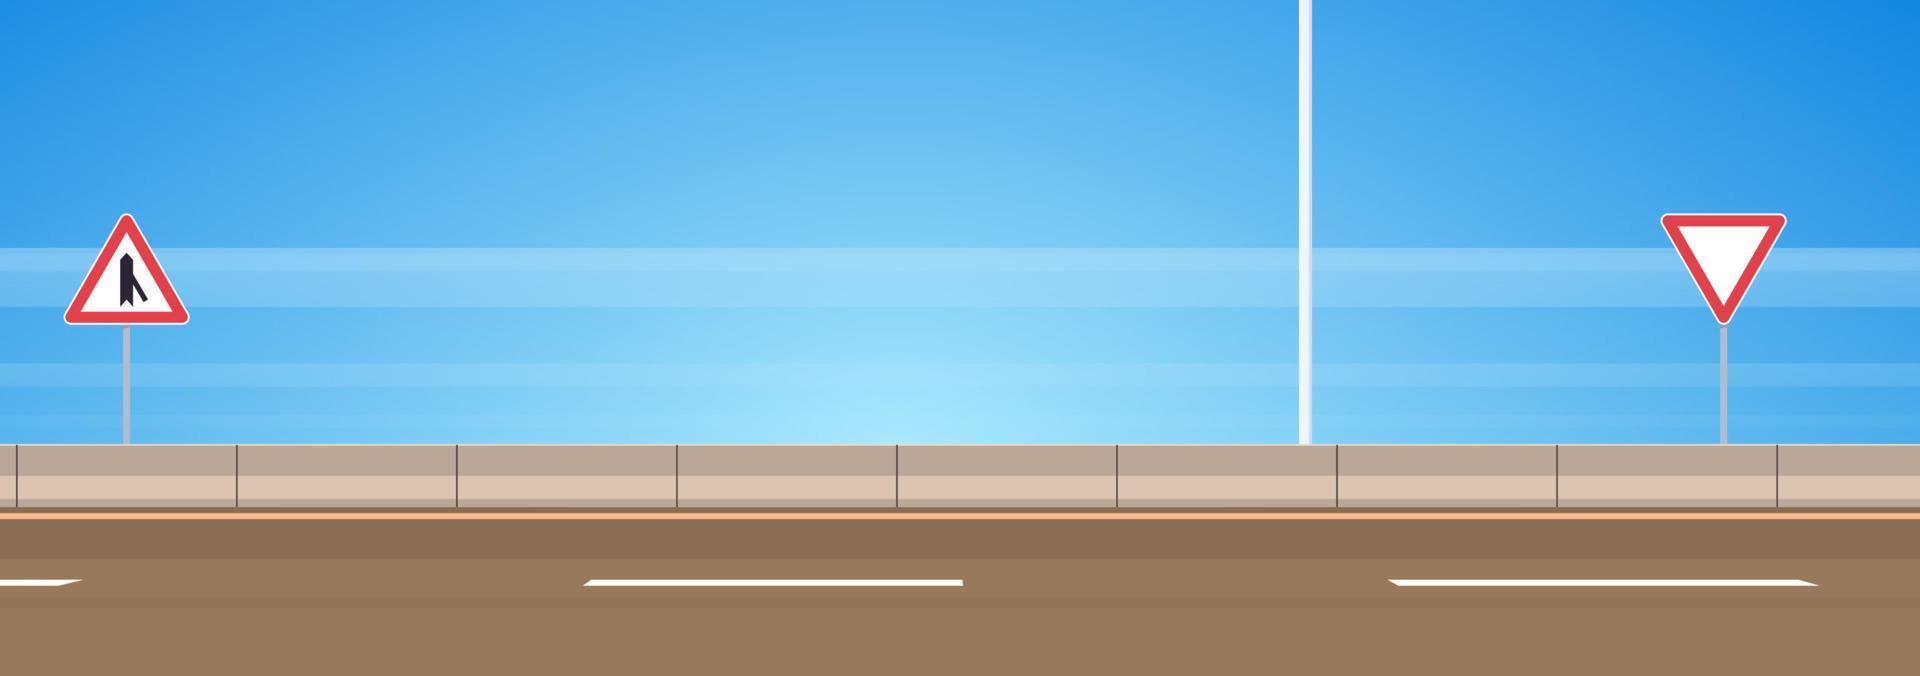 Highway asphalt road and road sign on the road with blue sky flat vector illustration.